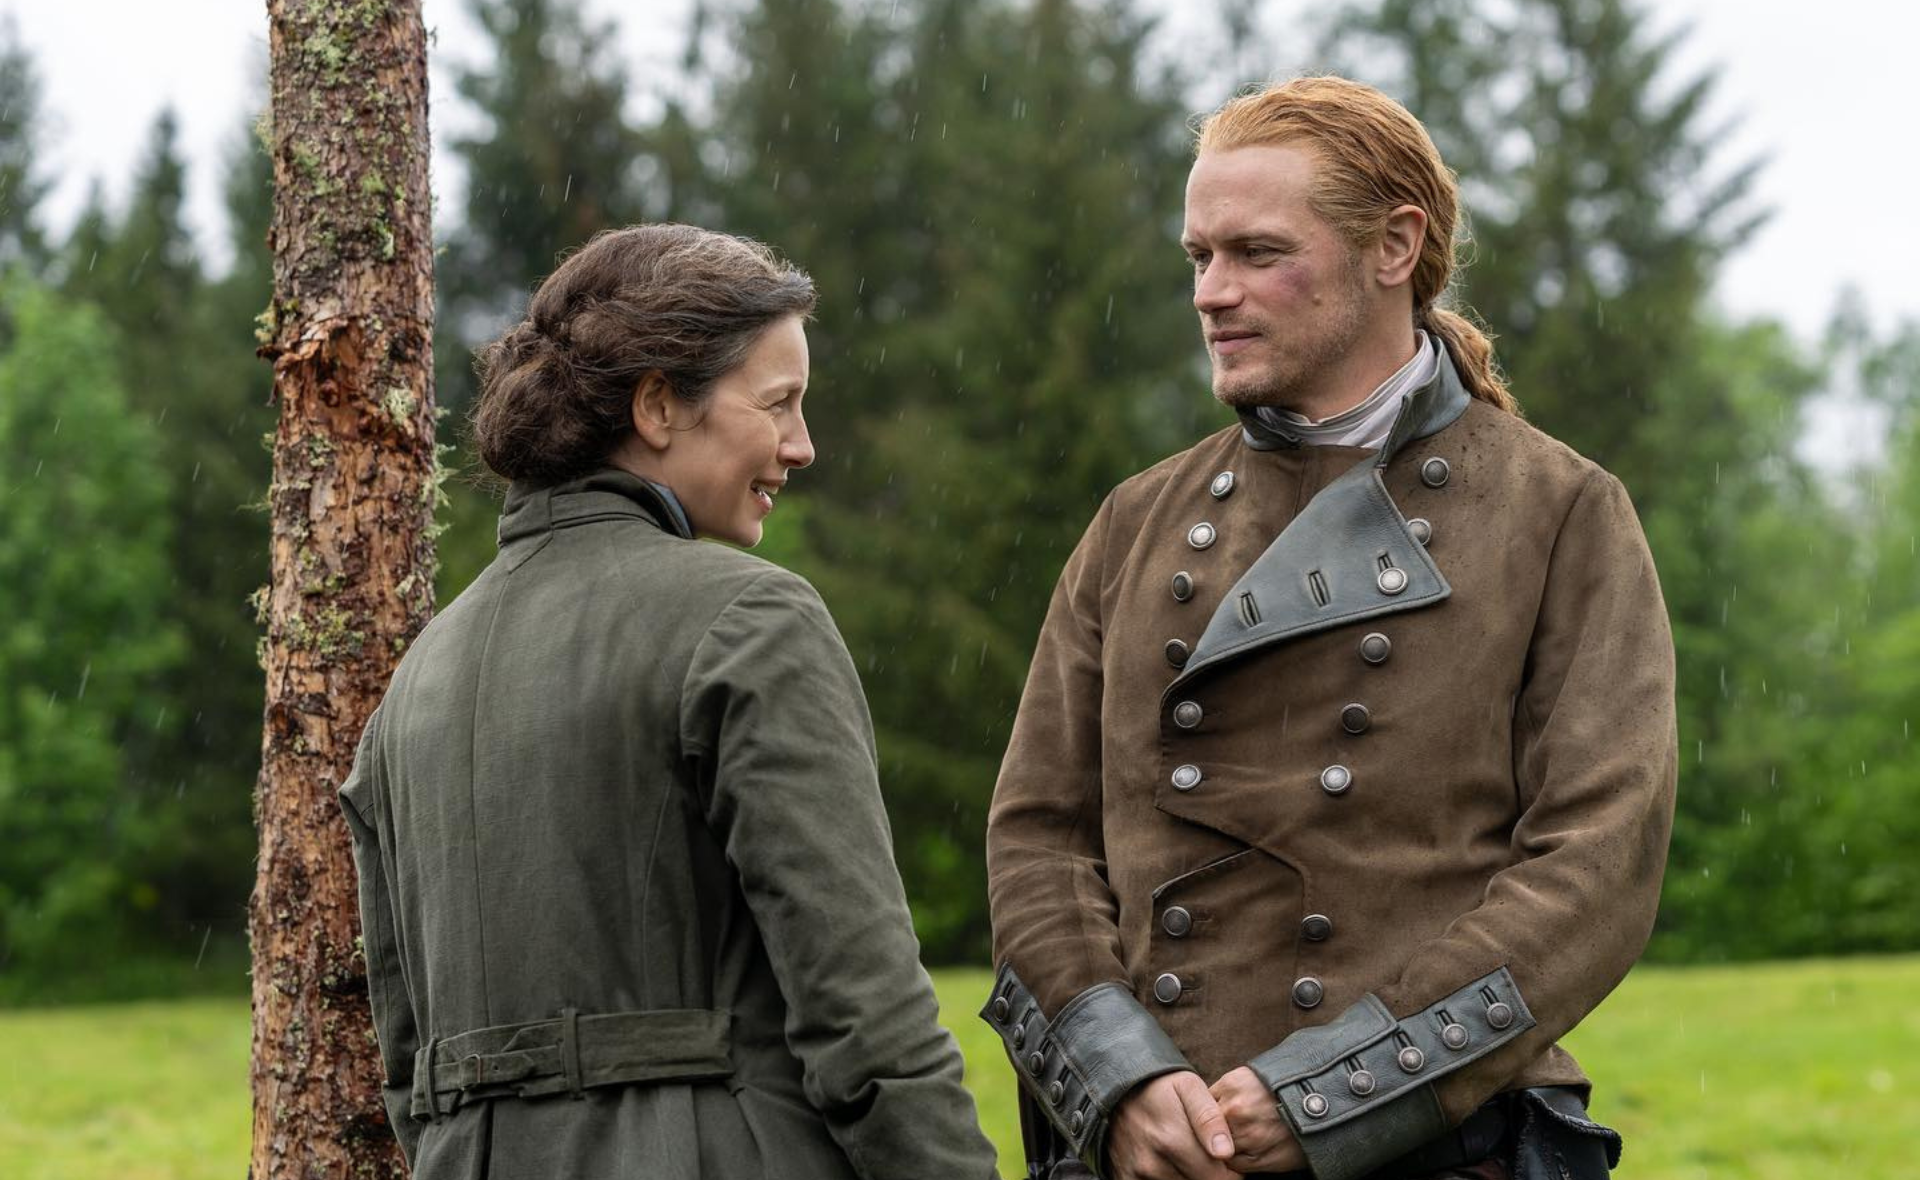 The Outlander prequel, Blood of My Blood will explore a different generations love